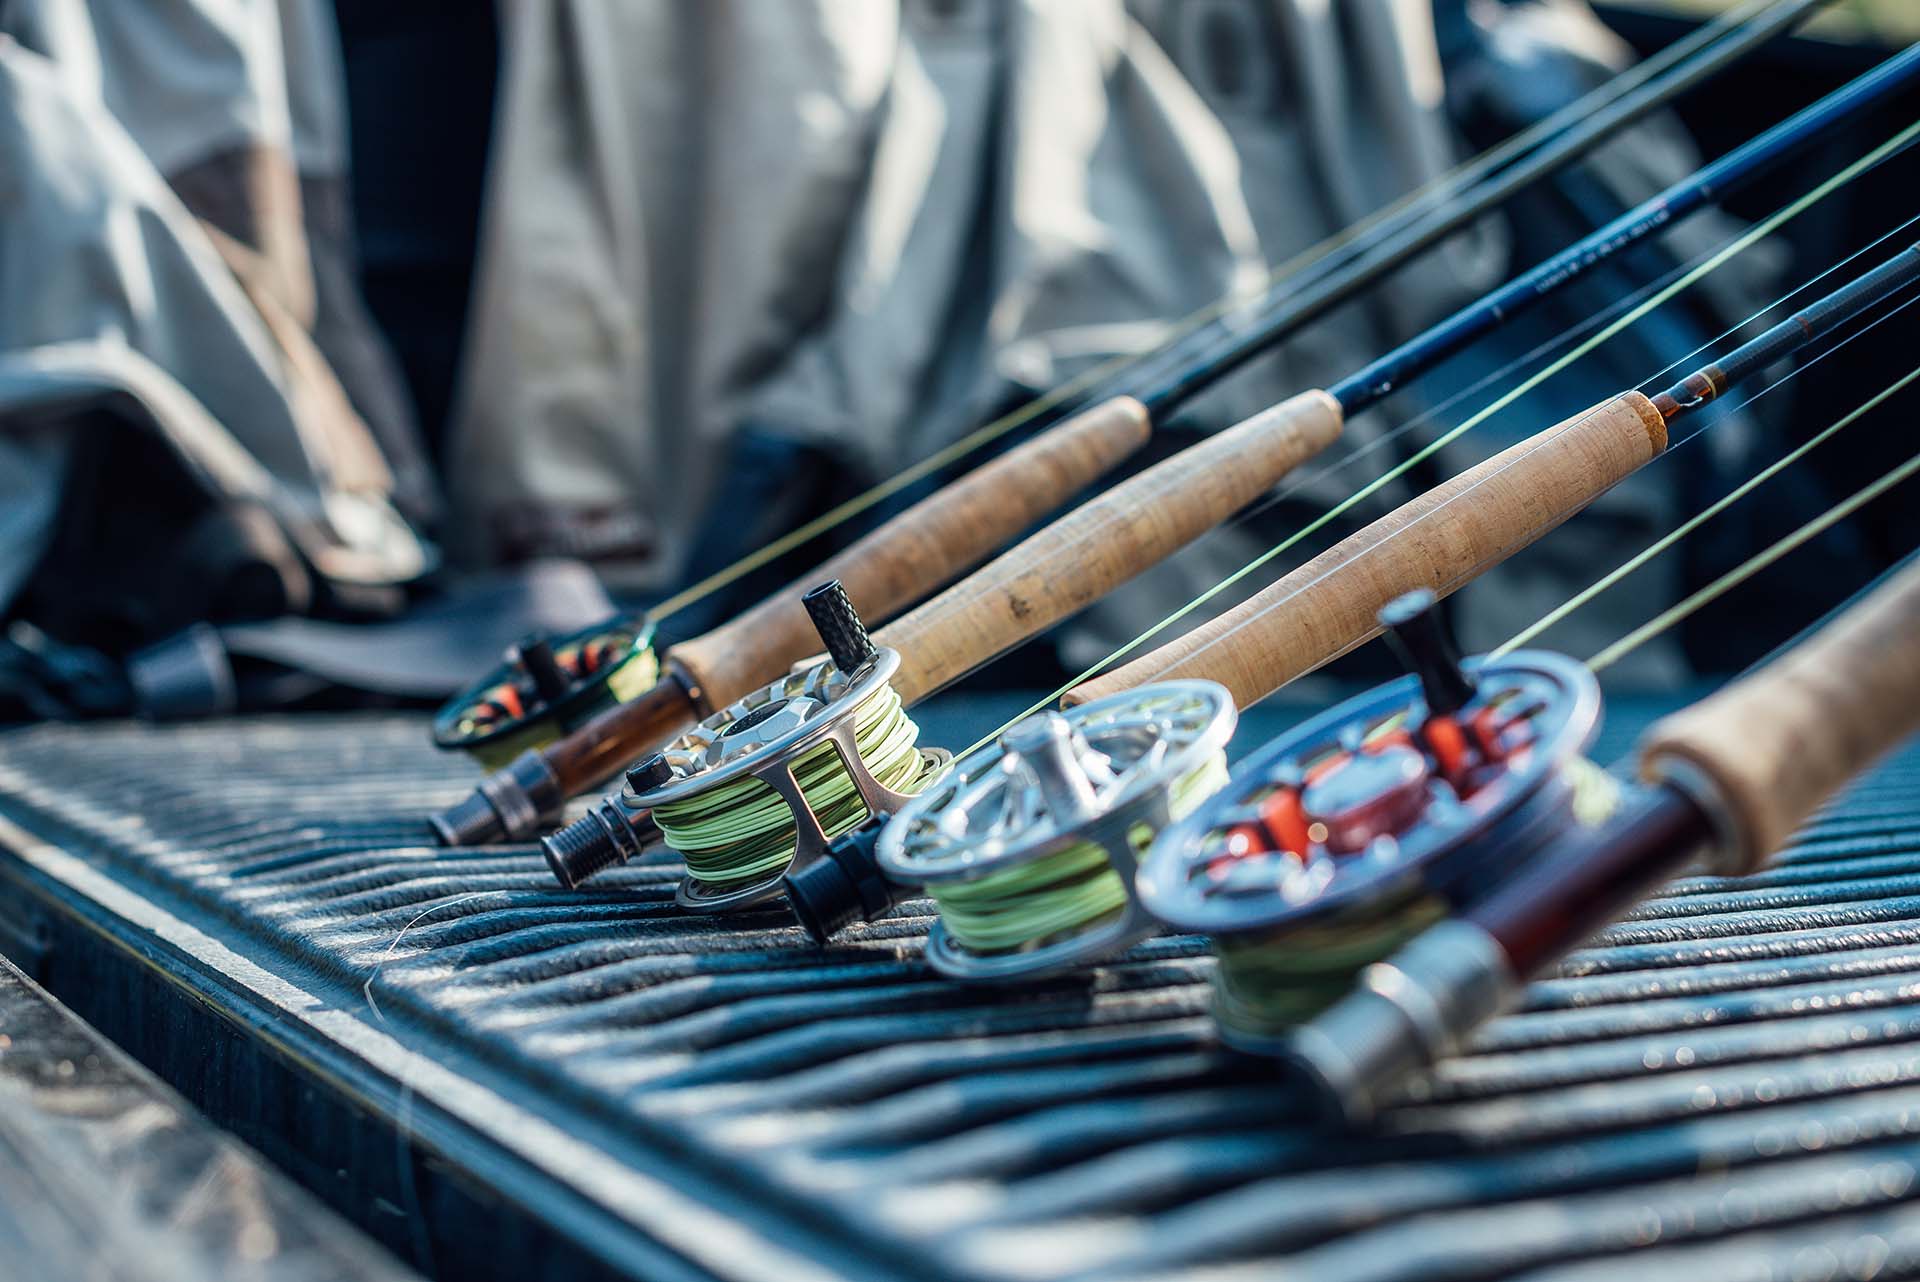 Fly Fishing Rods with reels on Truck